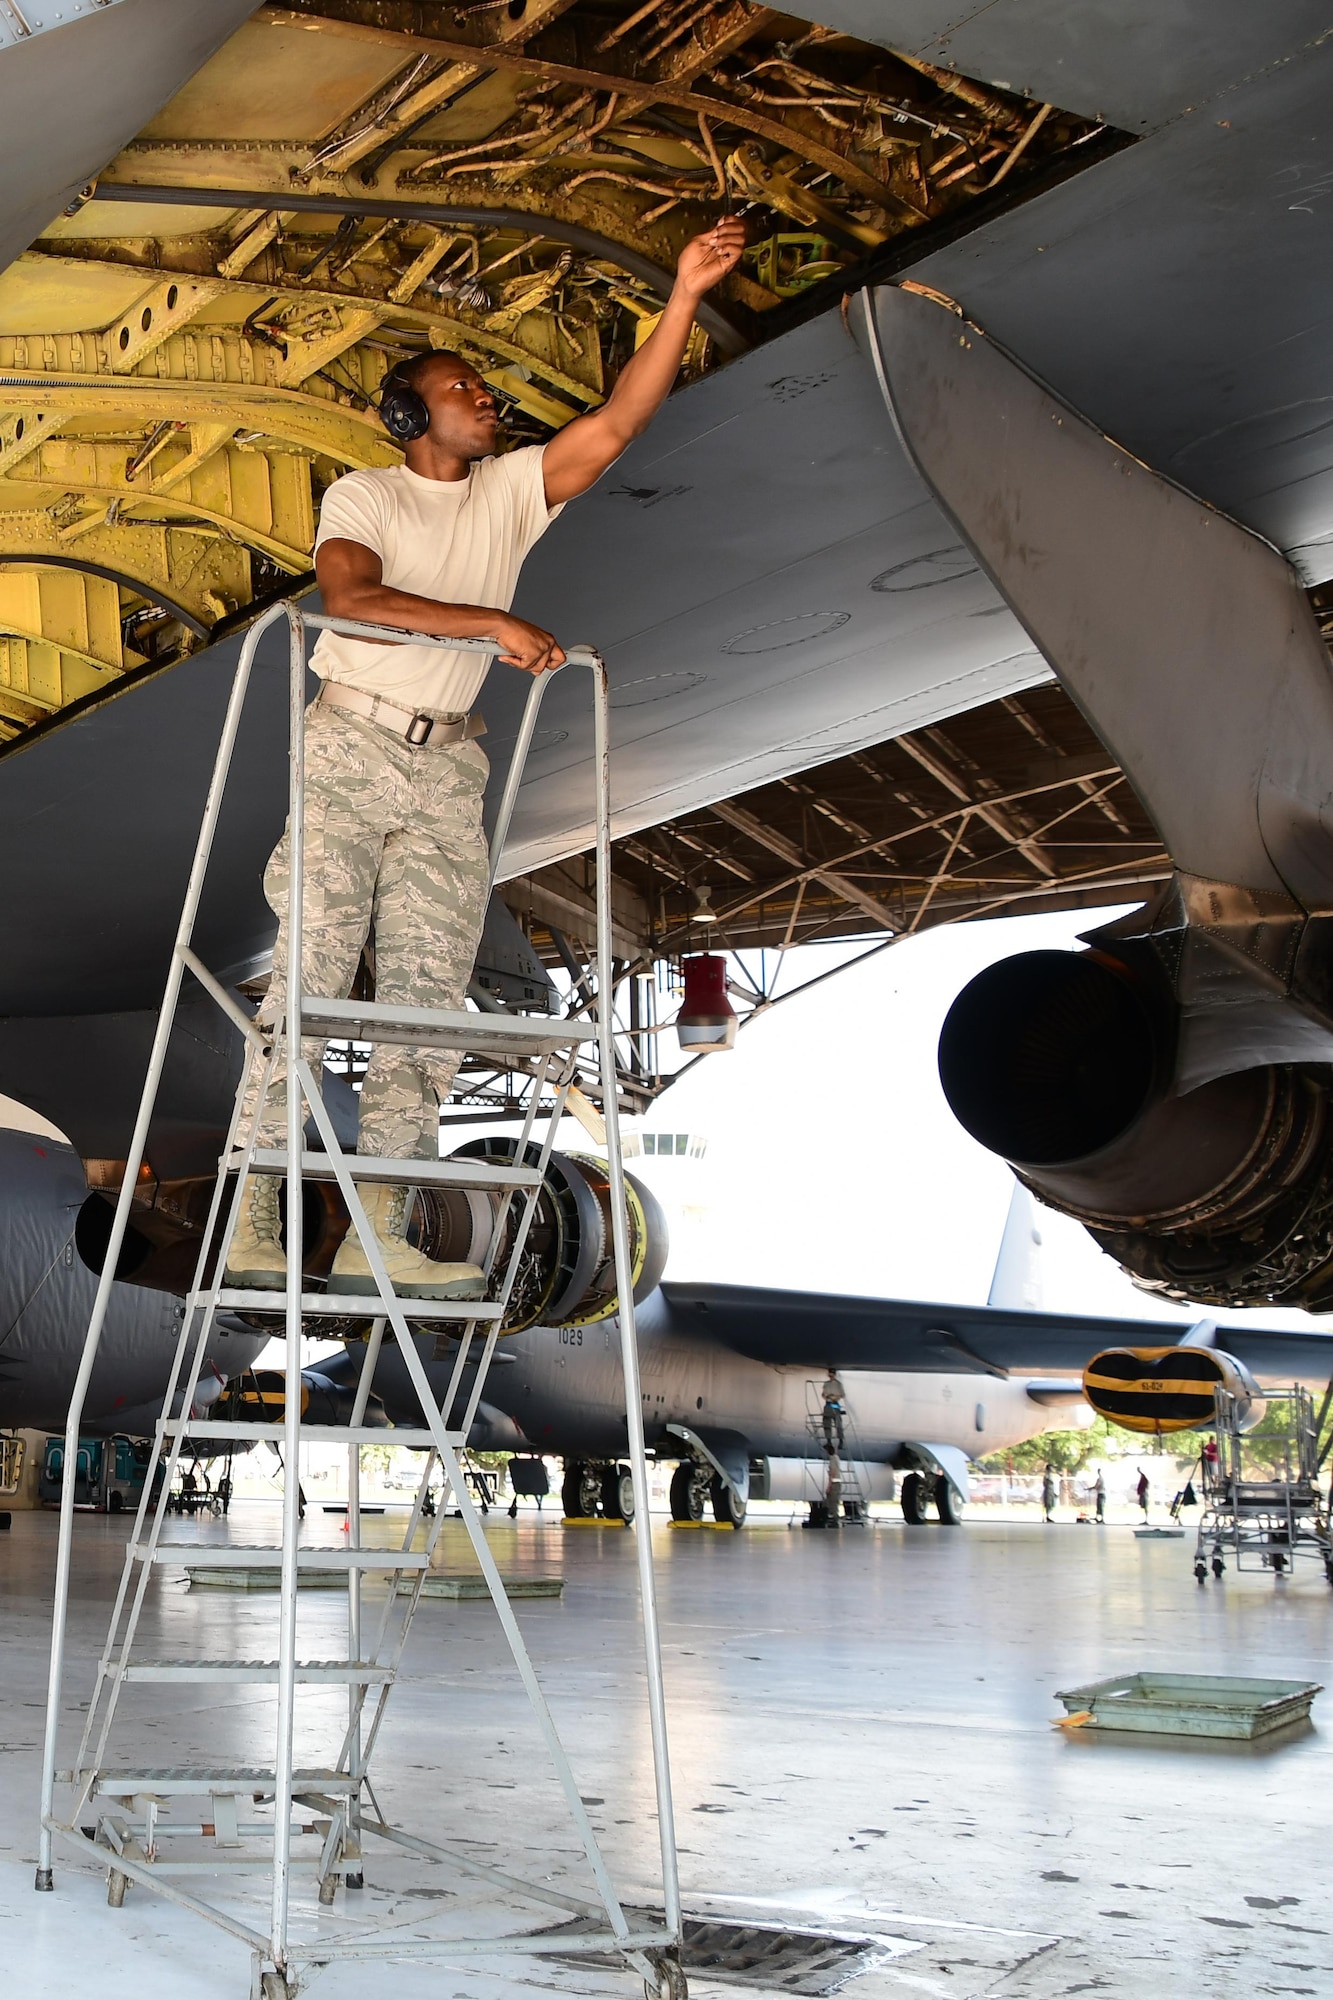 Airman First Class Jonathan Shepherd, an aircraft hydraulic systems specialist assigned to the 307th Maintenance Squadron, makes adjustments to the wing hydraulic system of a B-52 Stratofortress during a phase inspection on Barksdale Air Force Base, La. June 28, 2017. Shepherd is making the adjustment to the system after a line was replaced during a phase inspection of the bomber. (U.S. Air Force photo by Master Sgt. Dachelle Melville/Released)